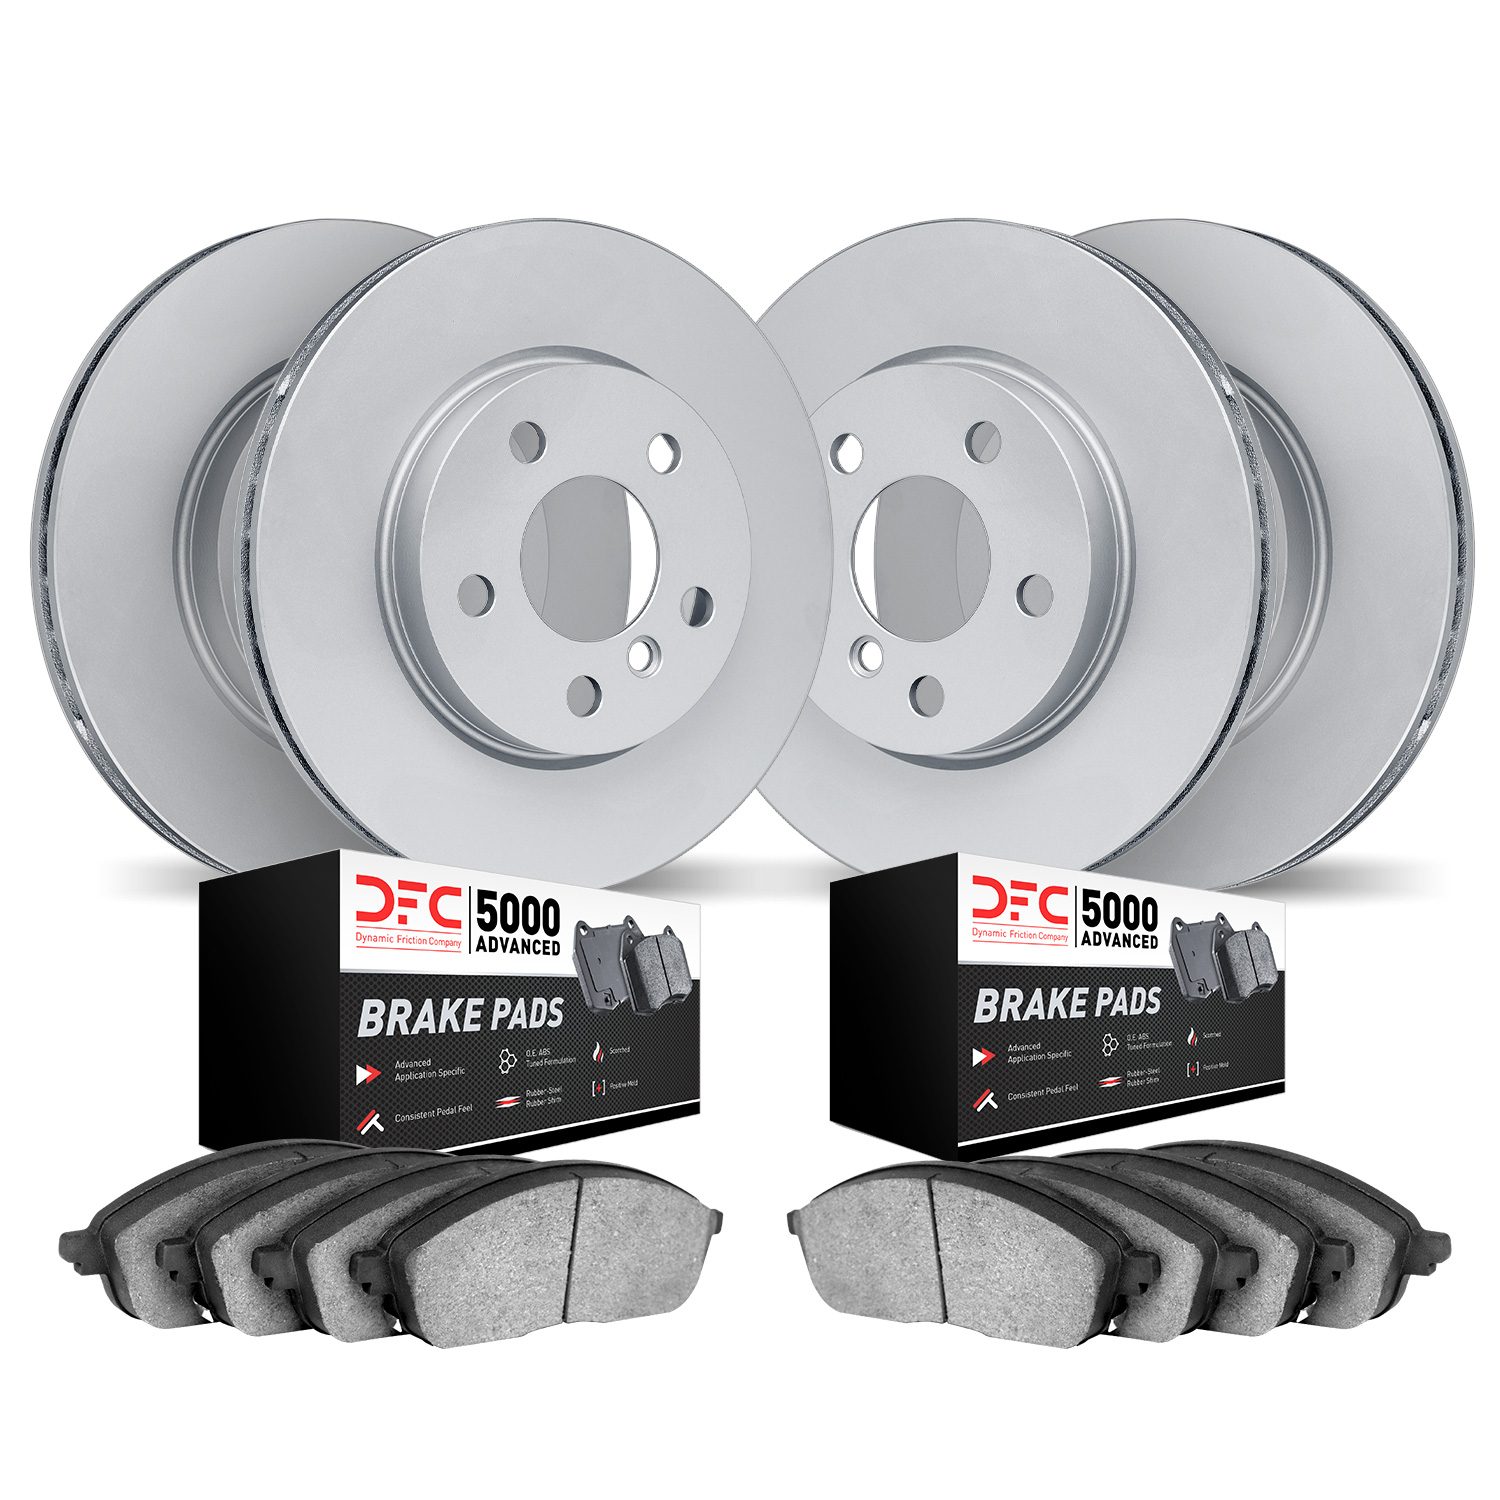 9504-31156 GEOMET Brake Rotors w/5000 Advanced Brake Pads Kit, Fits Select Multiple Makes/Models, Position: Front and Rear